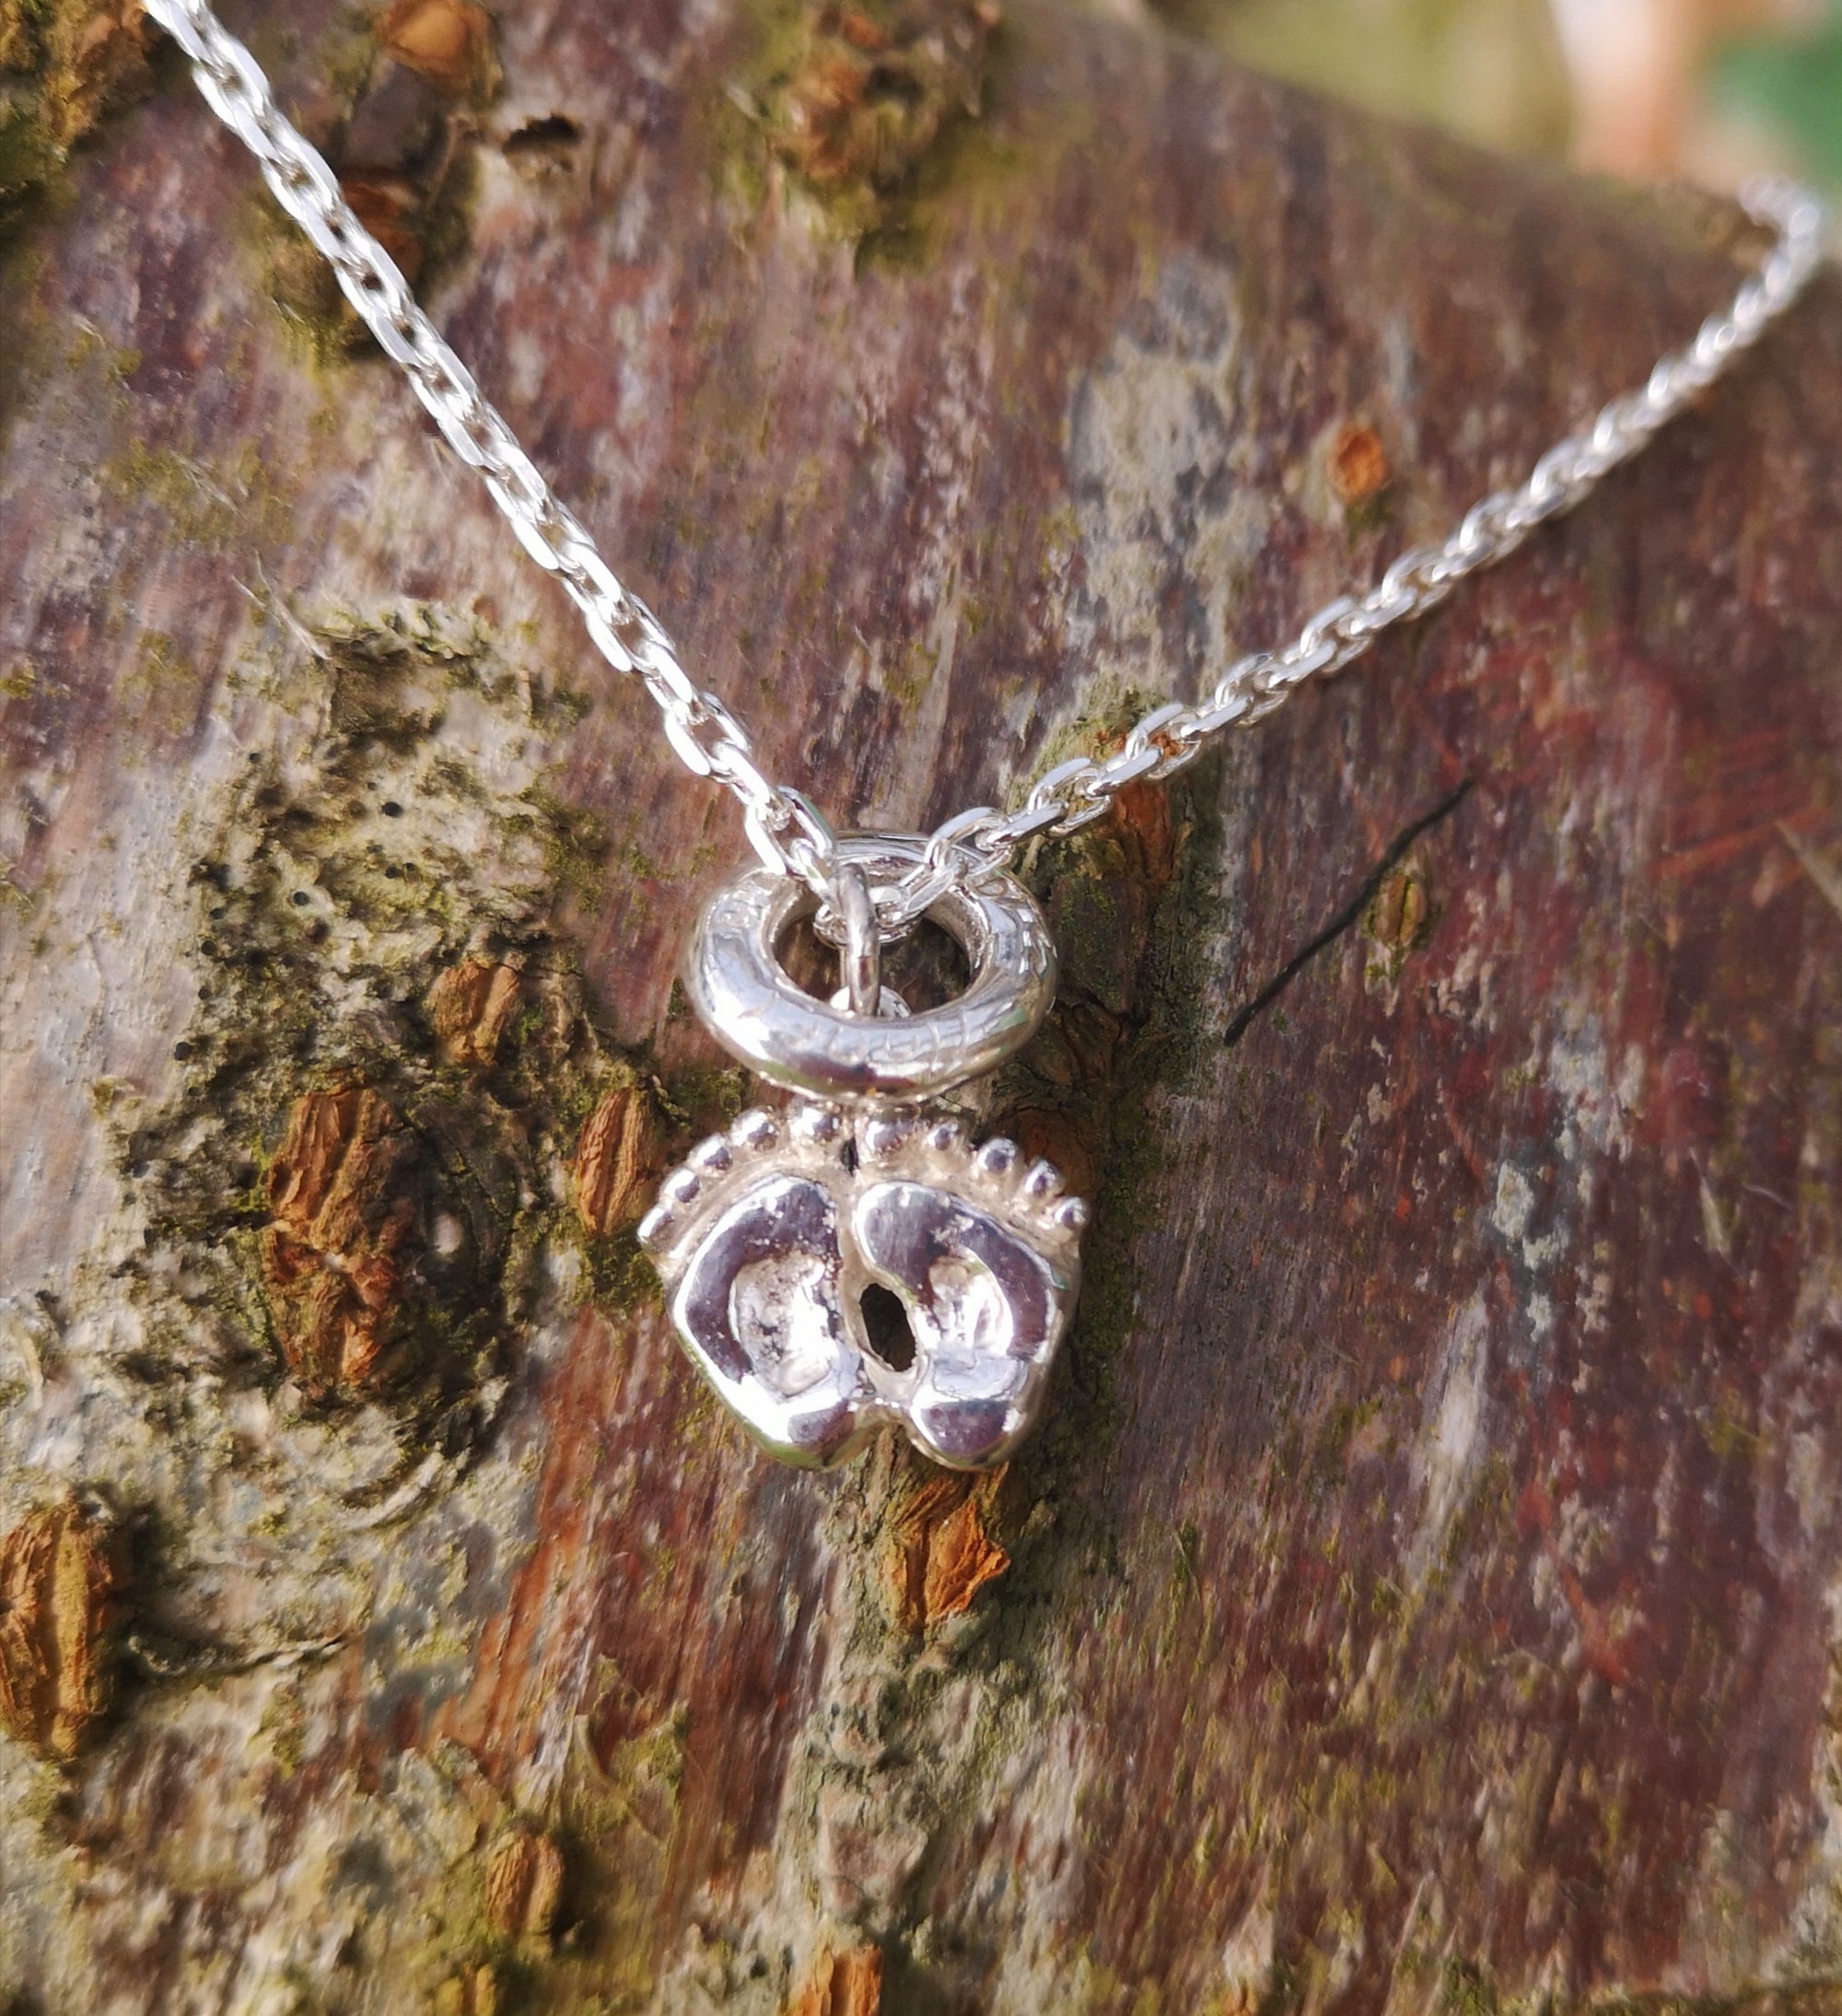 Sterling silver baby feet and halo pendant, part of Elena Brennan's angel jewelry collection. Photographed here against tree bark.